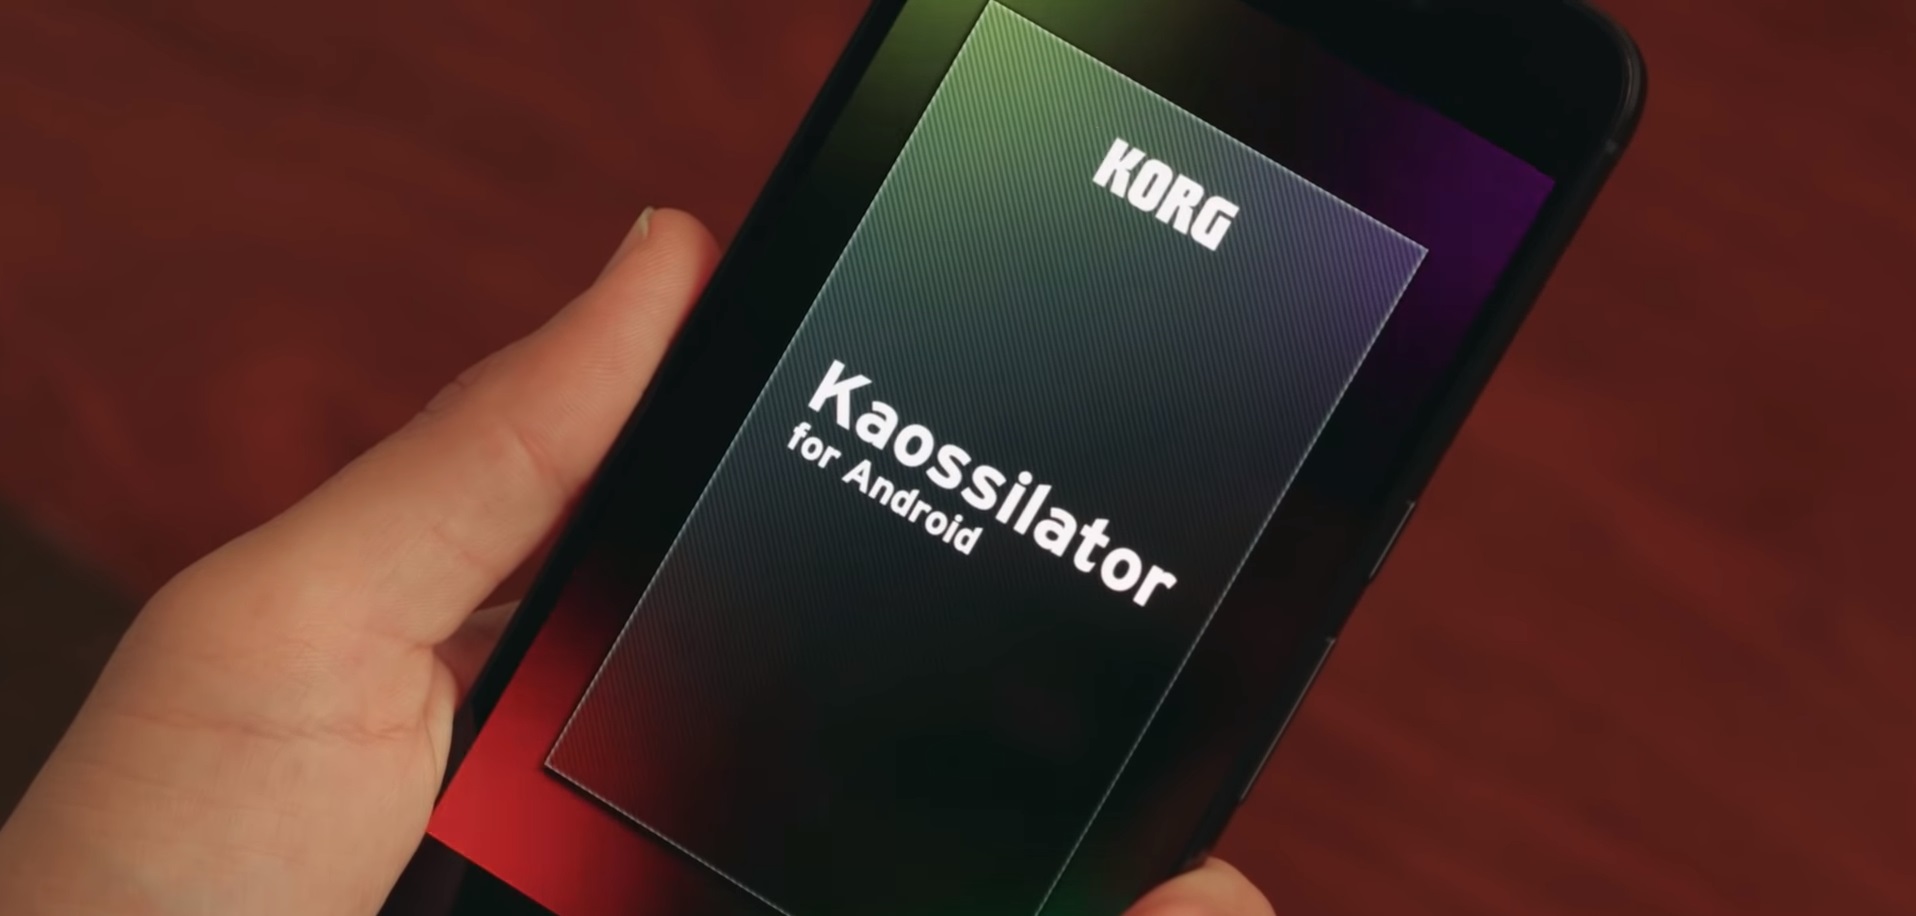 Moog & Korg’s synth apps are free to abate self-isolation boredom